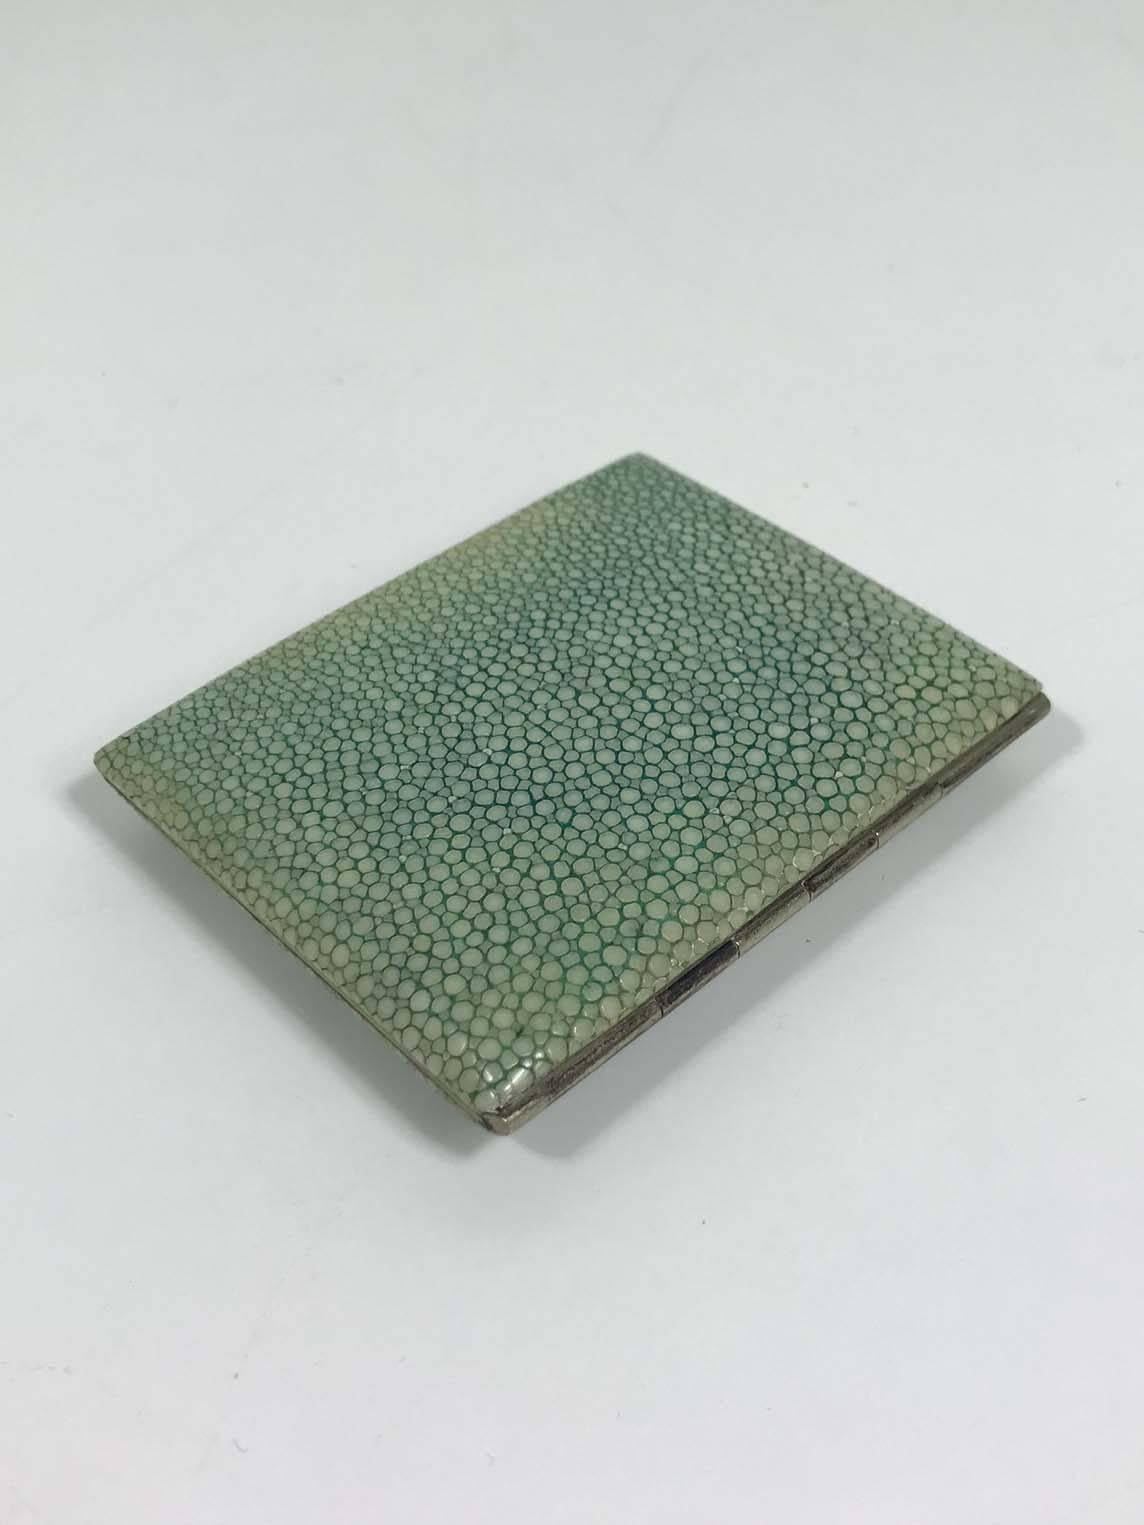 Vintage shagreen cigarette case. Mint green in color with minor wear consistent with age and regular use.